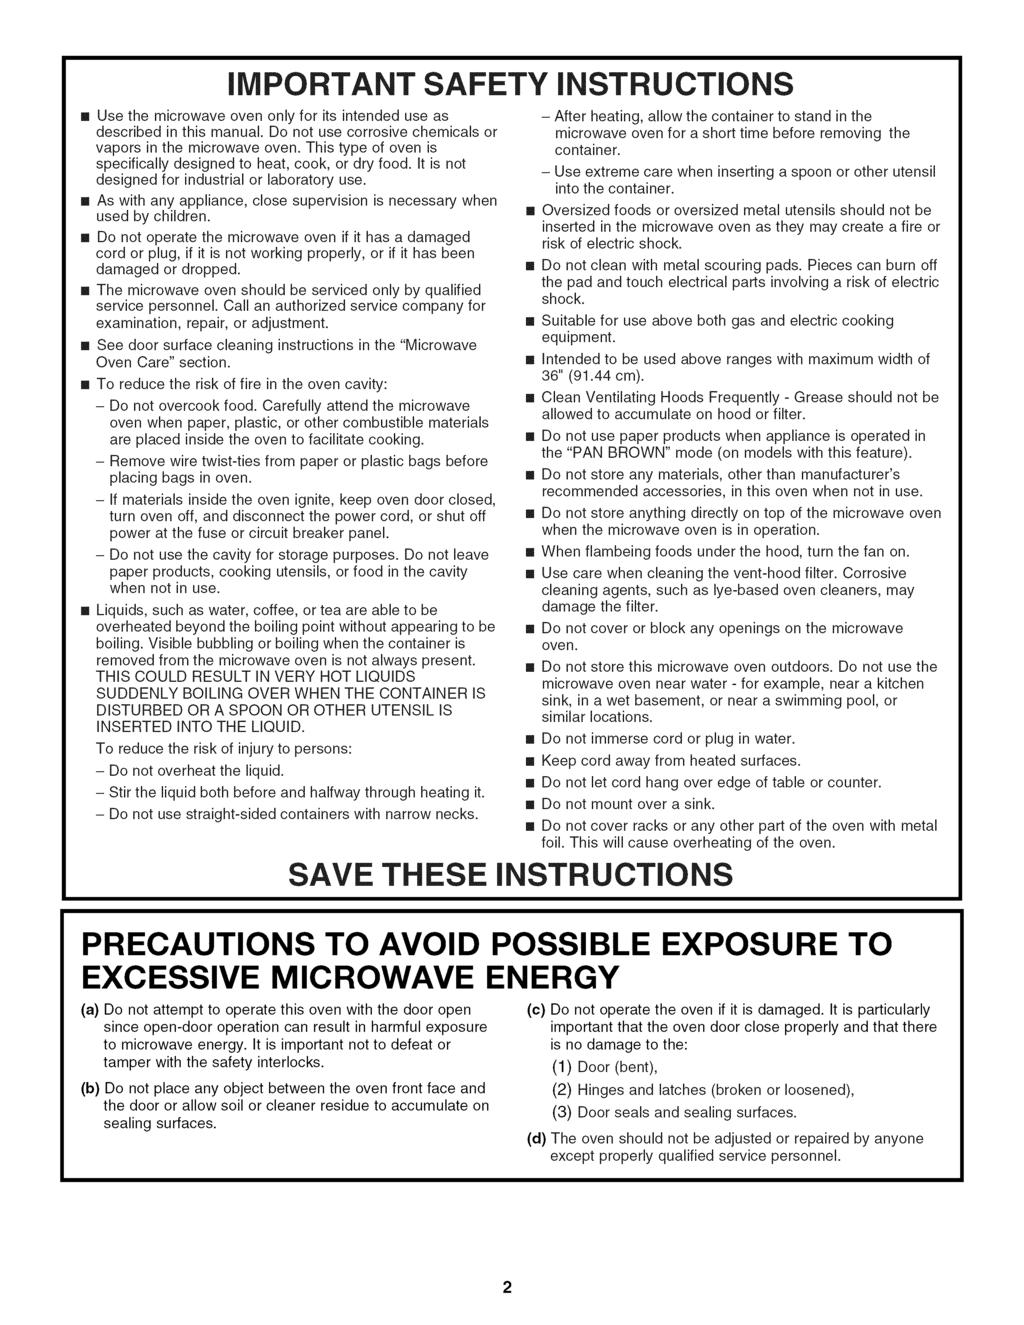 important SAFETY instructions m Use the microwave oven only for its intended use as described in this manual. Do not use corrosive chemicals or vapors in the microwave oven.